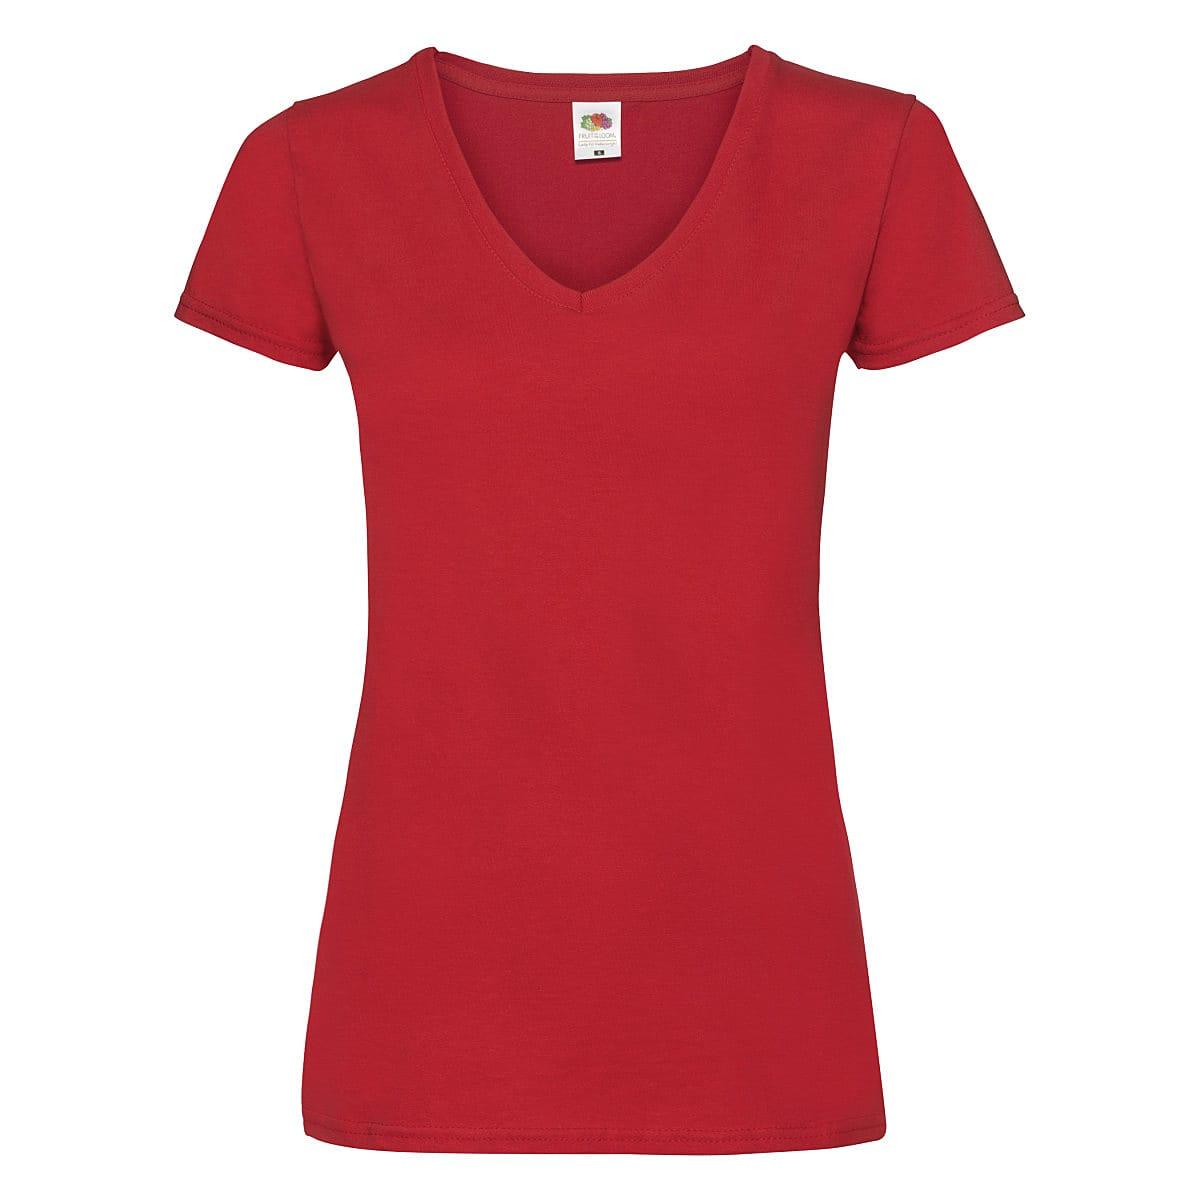 Fruit Of The Loom Lady-Fit Valueweight V-Neck T-Shirt in Red (Product Code: 61398)